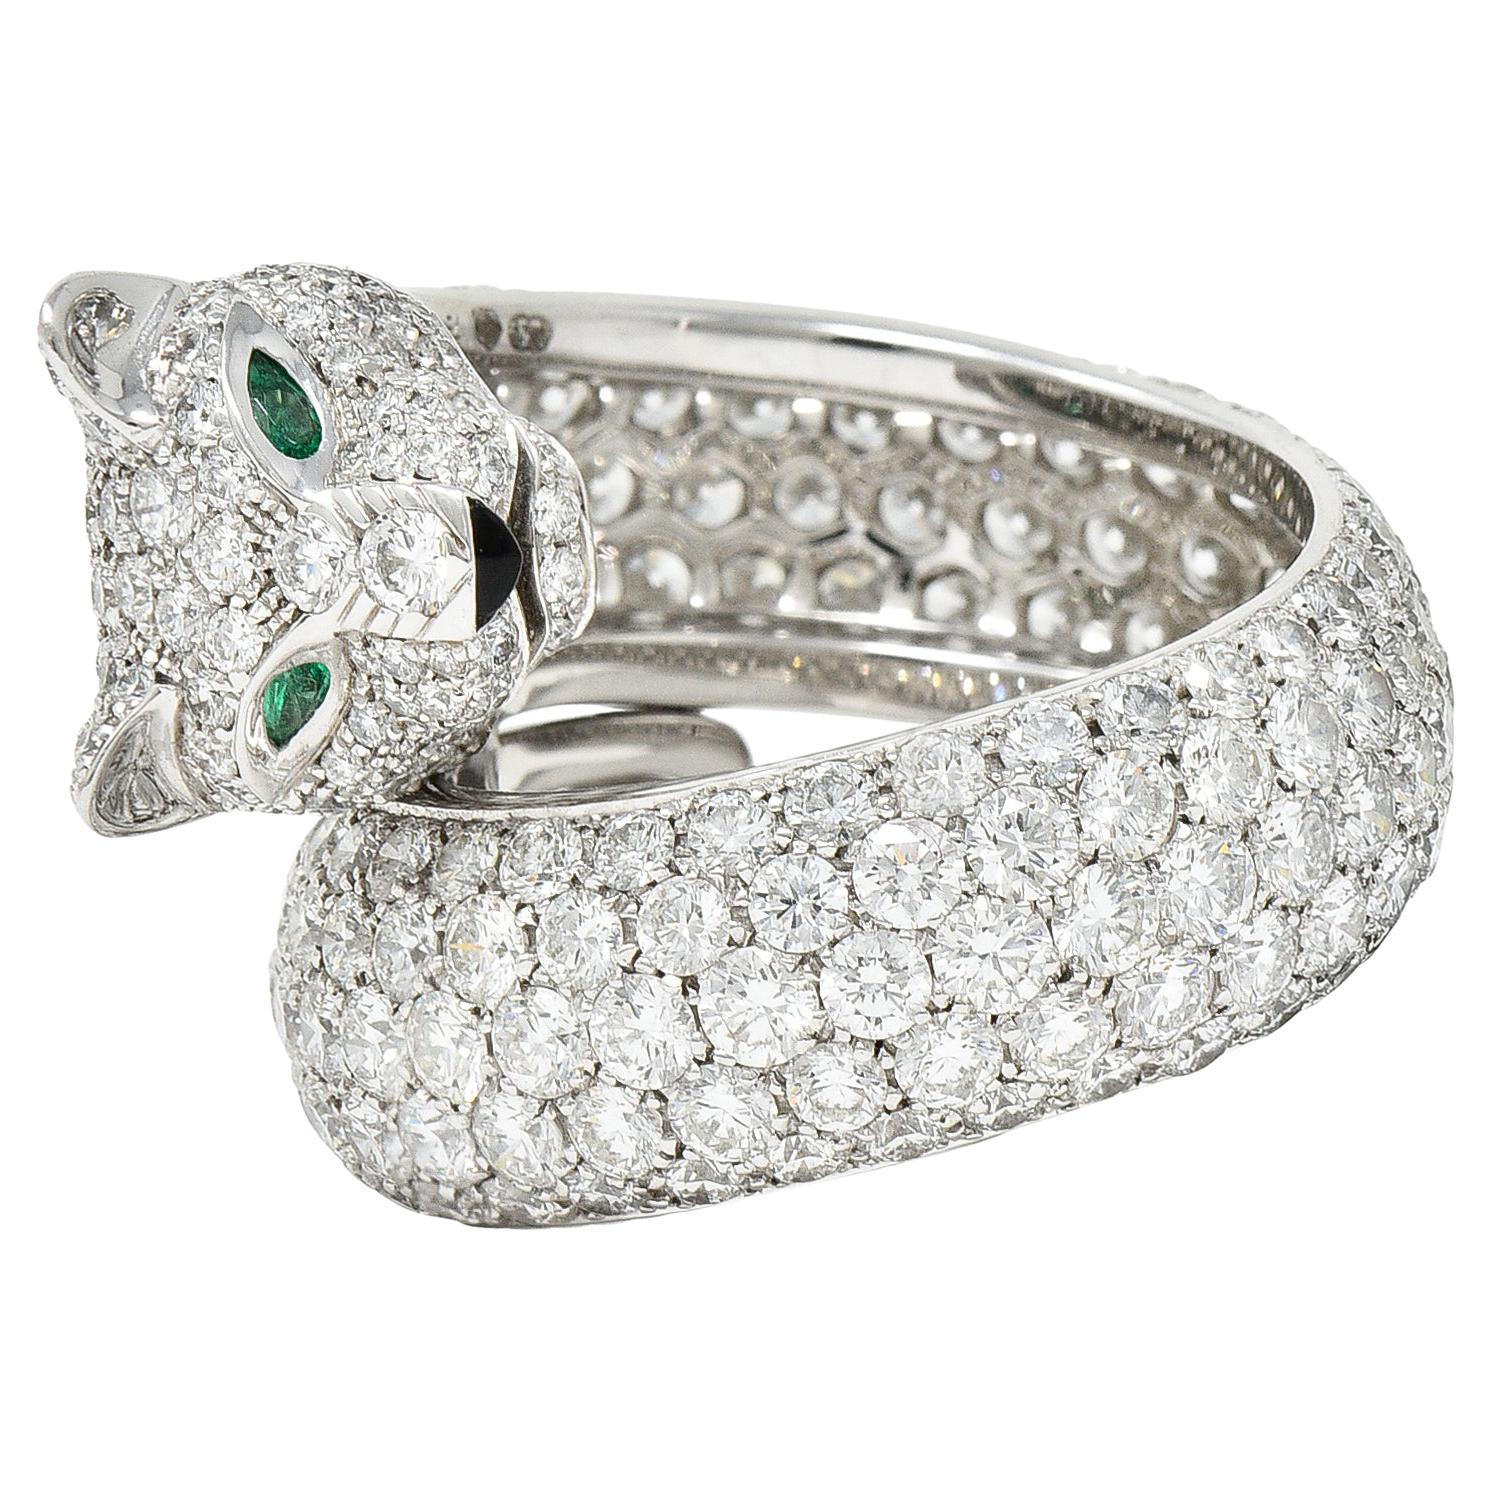 Bypass ring is designed as a stylized panther motif that wraps finger

Pavè set throughout by round brilliant cut diamonds

Weighing in total approximately 6.50 carats - E/F color with VVS to VS clarity

With pear cut emerald eyes weighing in total